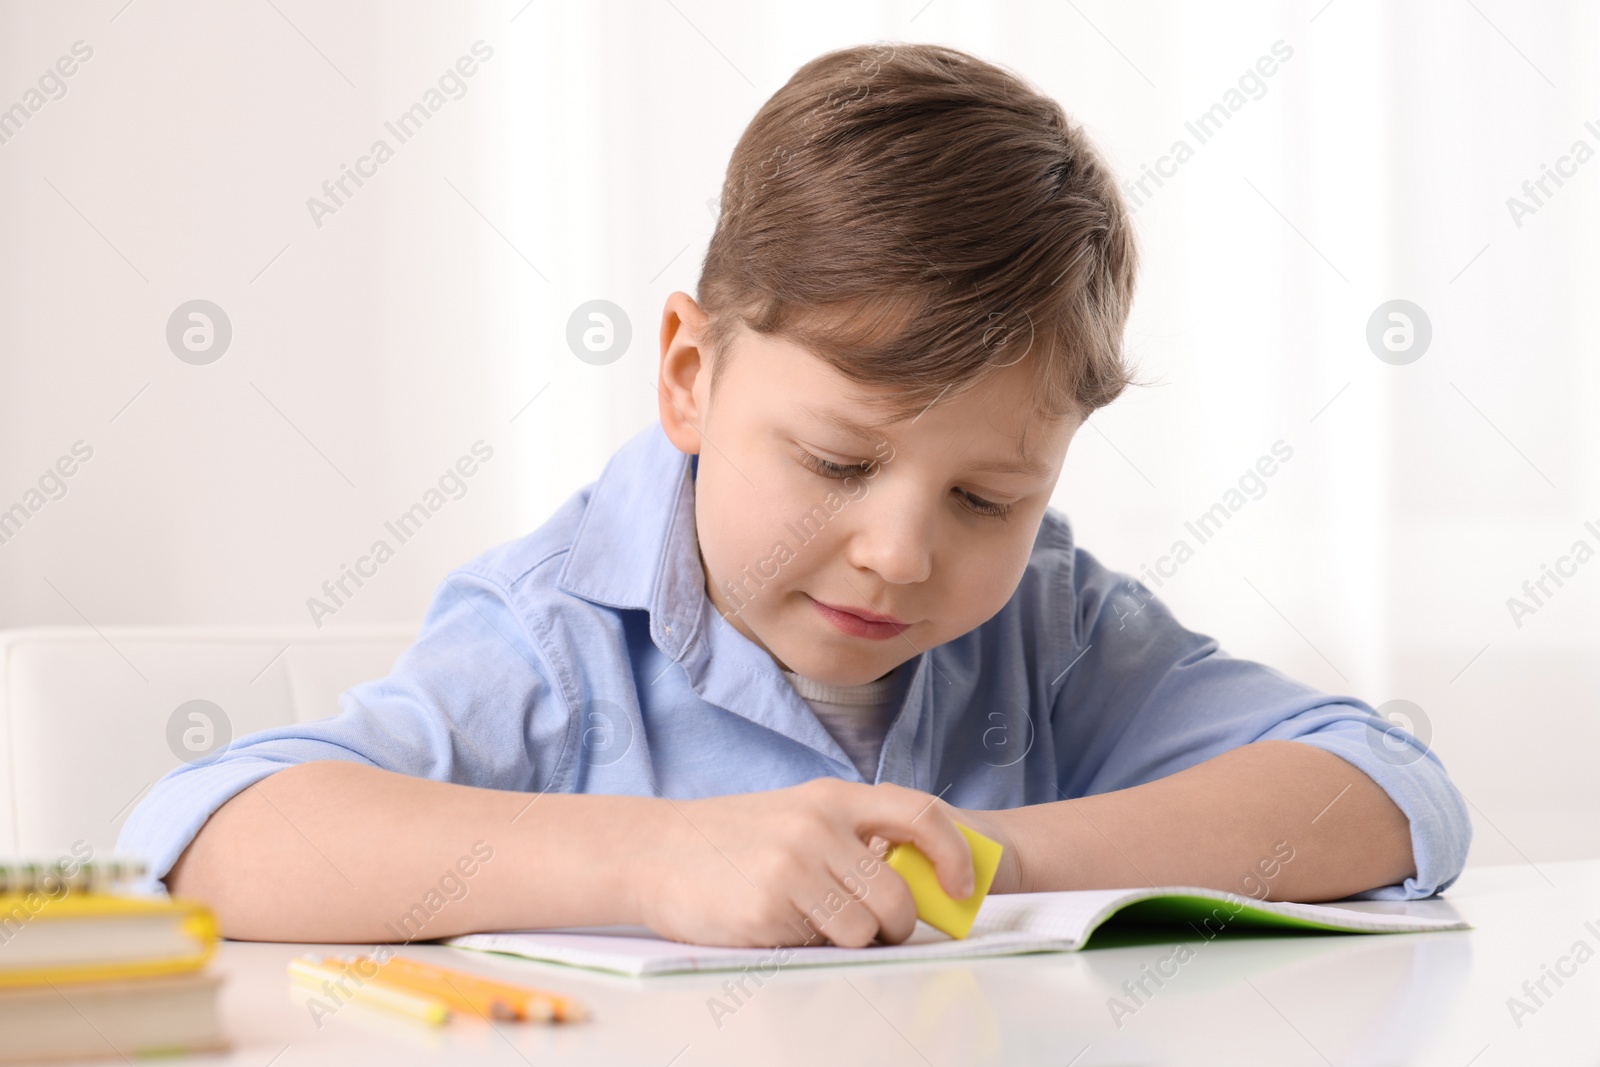 Photo of Little boy erasing mistake in his notebook at white desk indoors